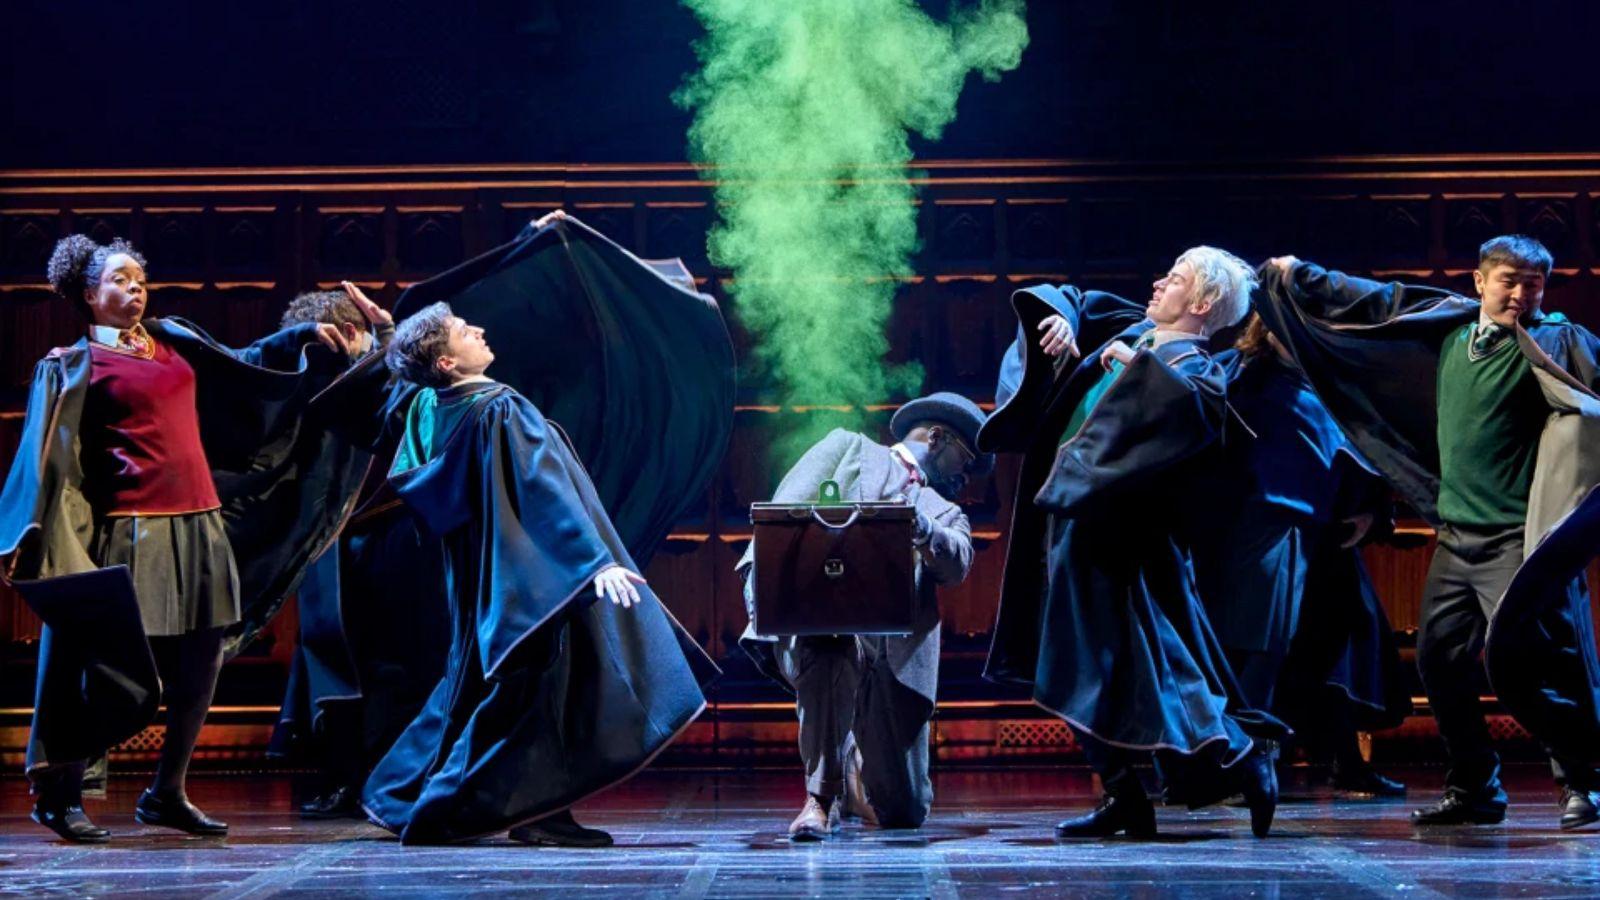 Harry Potter and the Cursed child being performed at London Theatre,